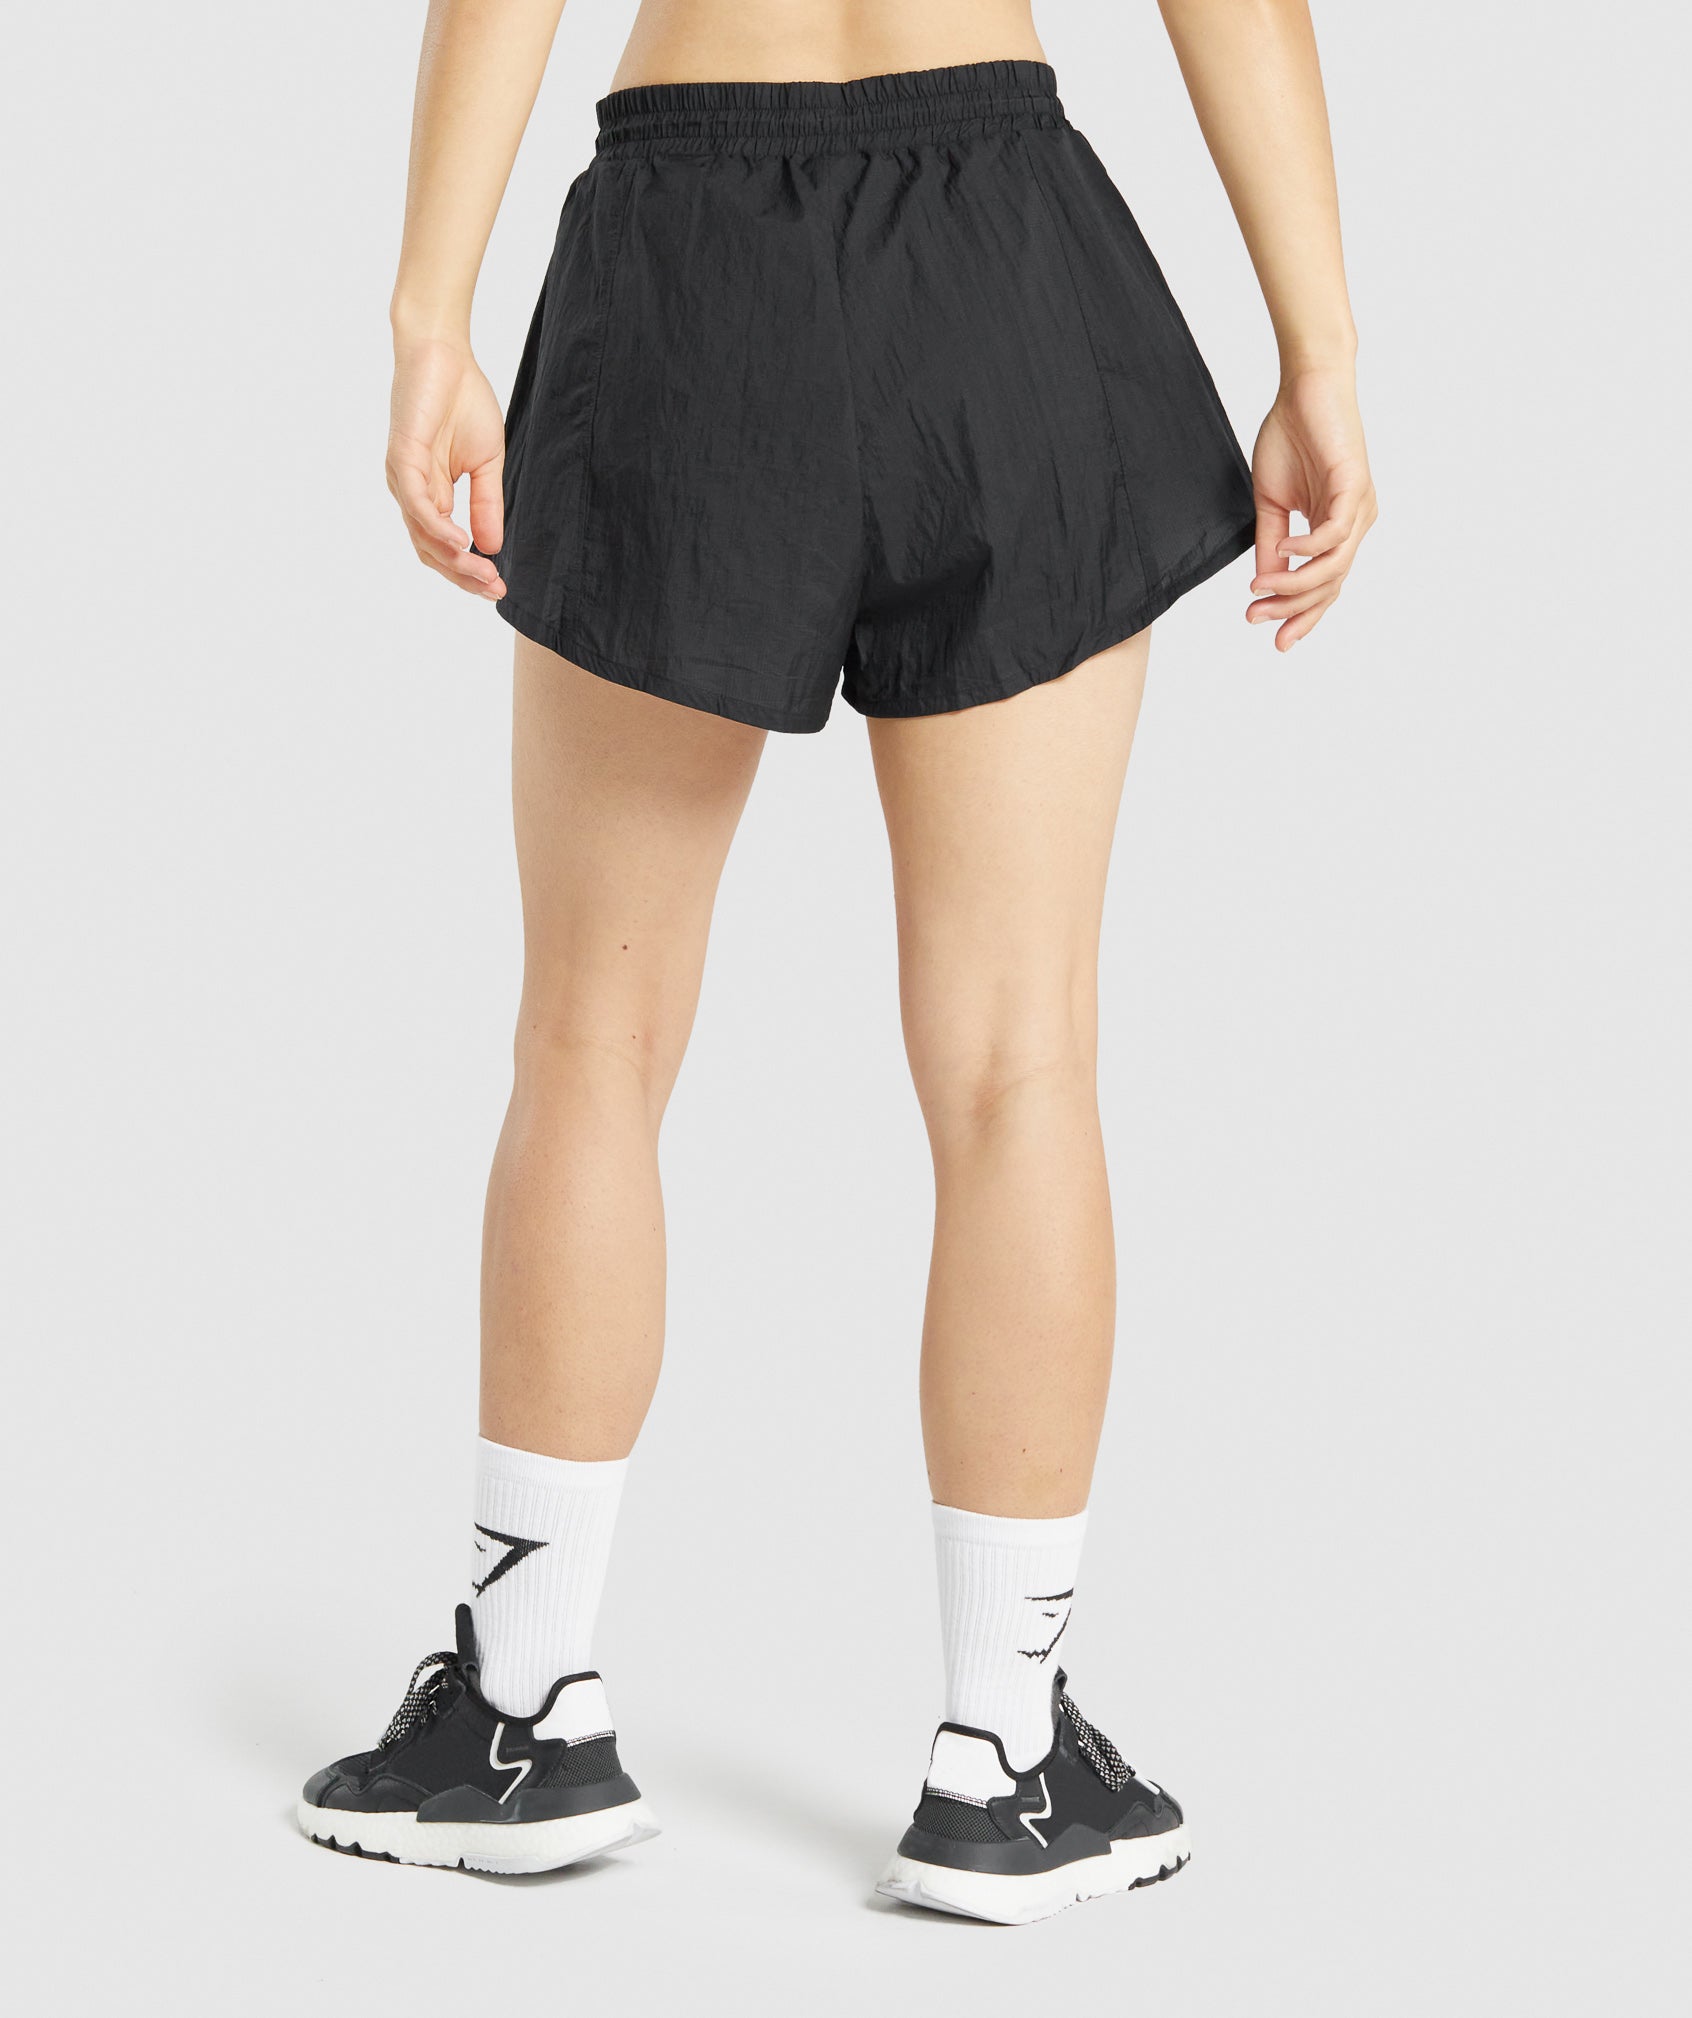 Pulse 2 in 1 Shorts in Black - view 3